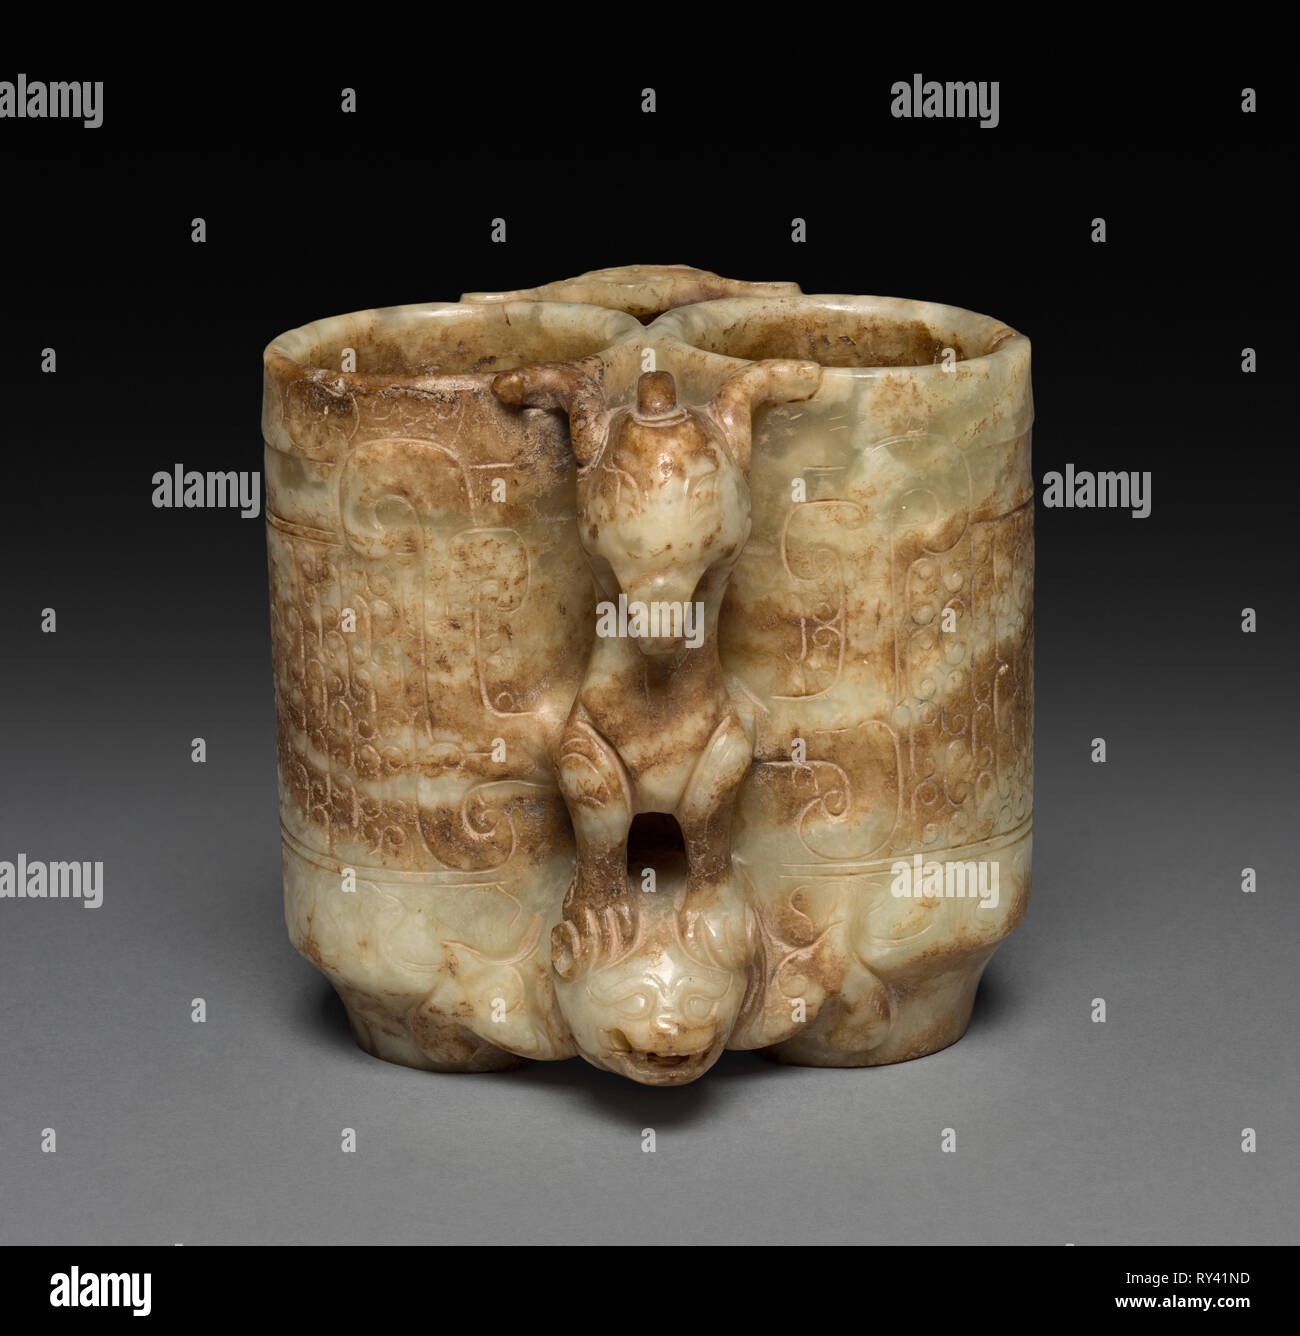 Champion Vase, 960- 1279. China, Song dynasty (960-1279) - Ming dynasty (1368-1644). Jade; overall: 8.9 x 9.2 x 4.6 cm (3 1/2 x 3 5/8 x 1 13/16 in Stock Photo